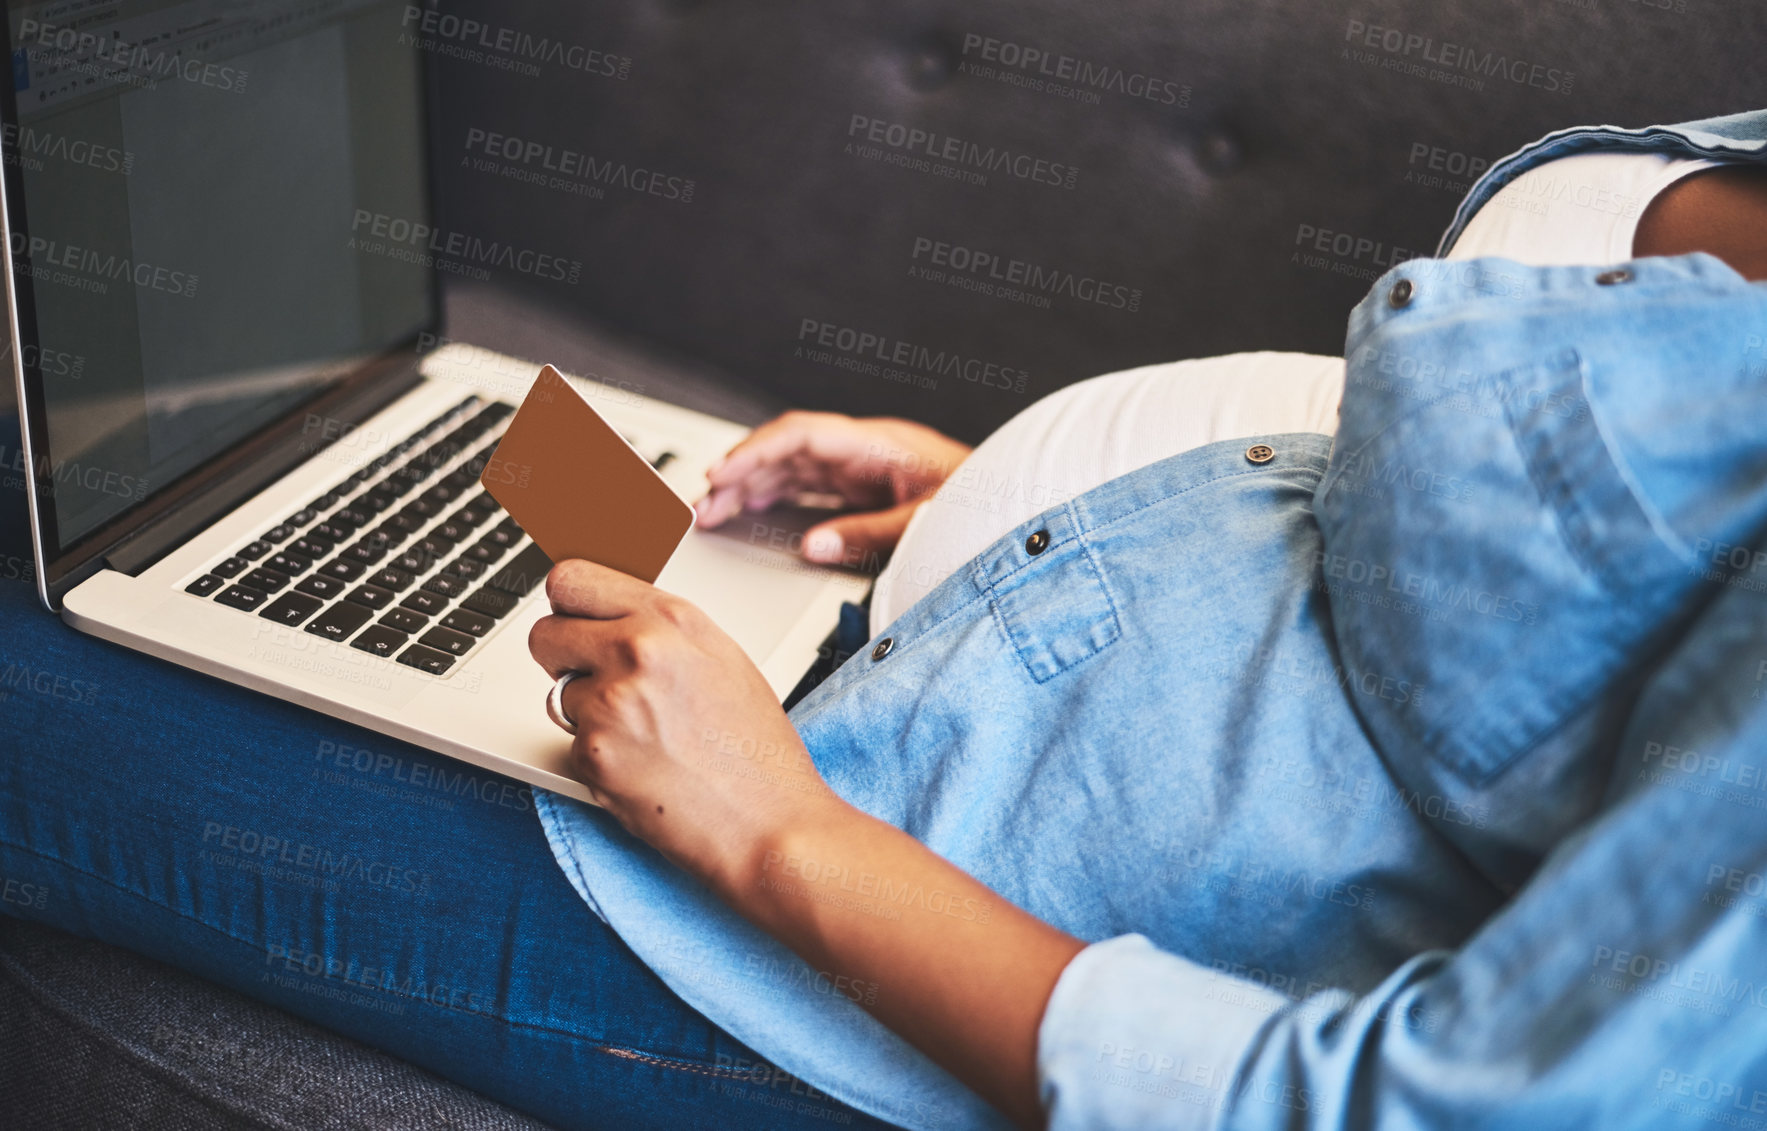 Buy stock photo Cropped shot of a pregnant woman using a laptop and credit card on the sofa at home